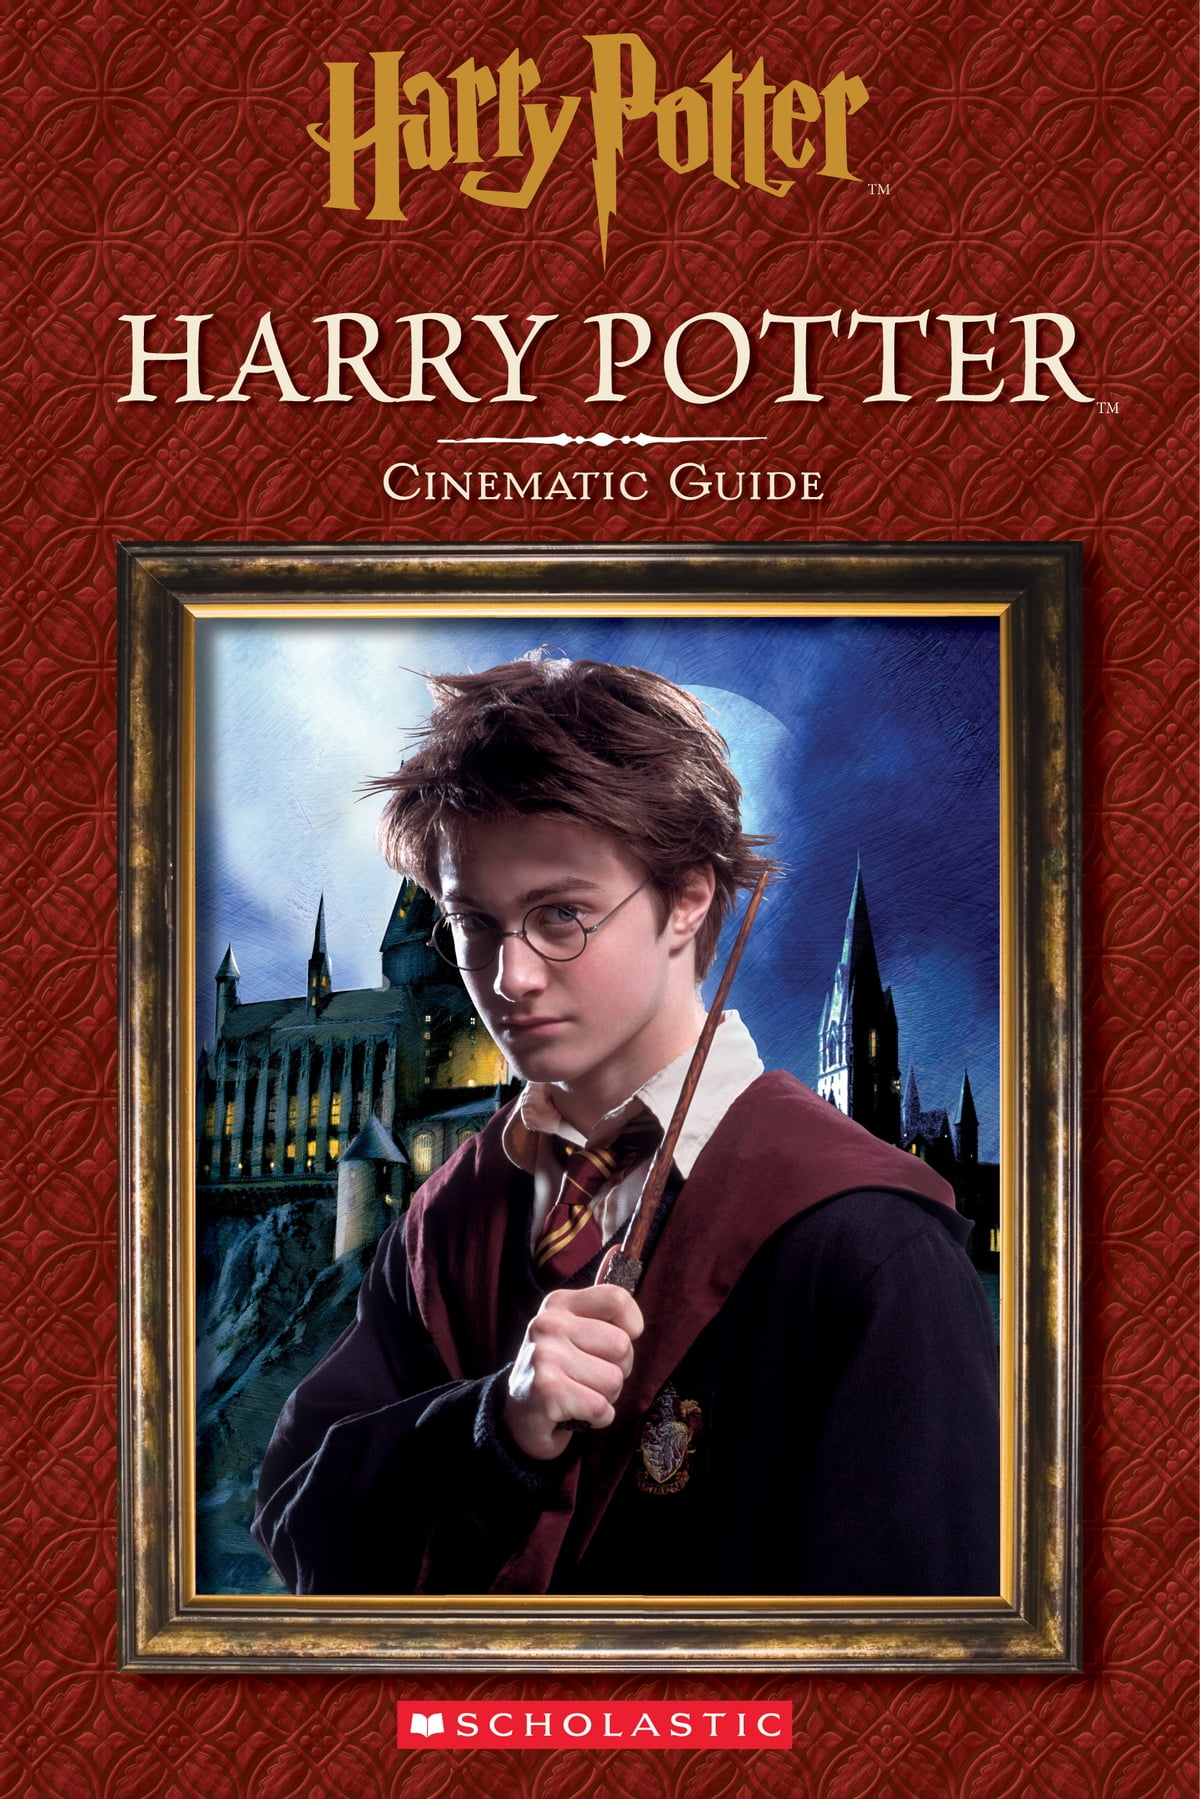 The Essential Harry Potter Audiobooks Guide 2